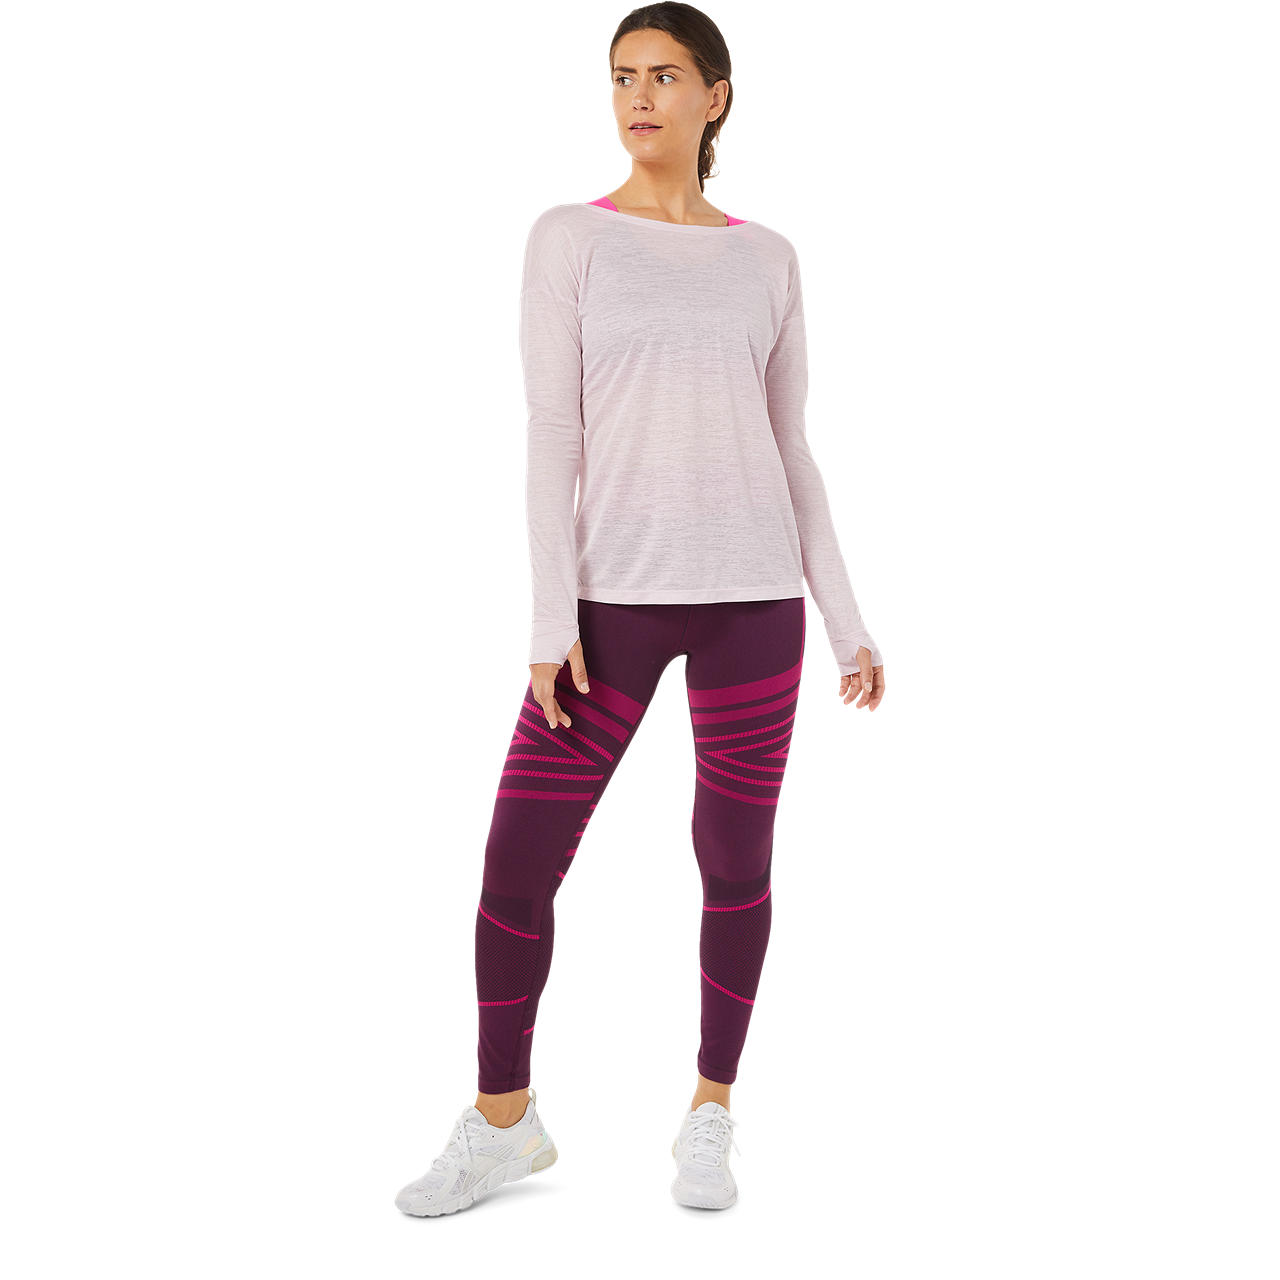 ASICS WOMEN OPEN BACK LS TOP image number null